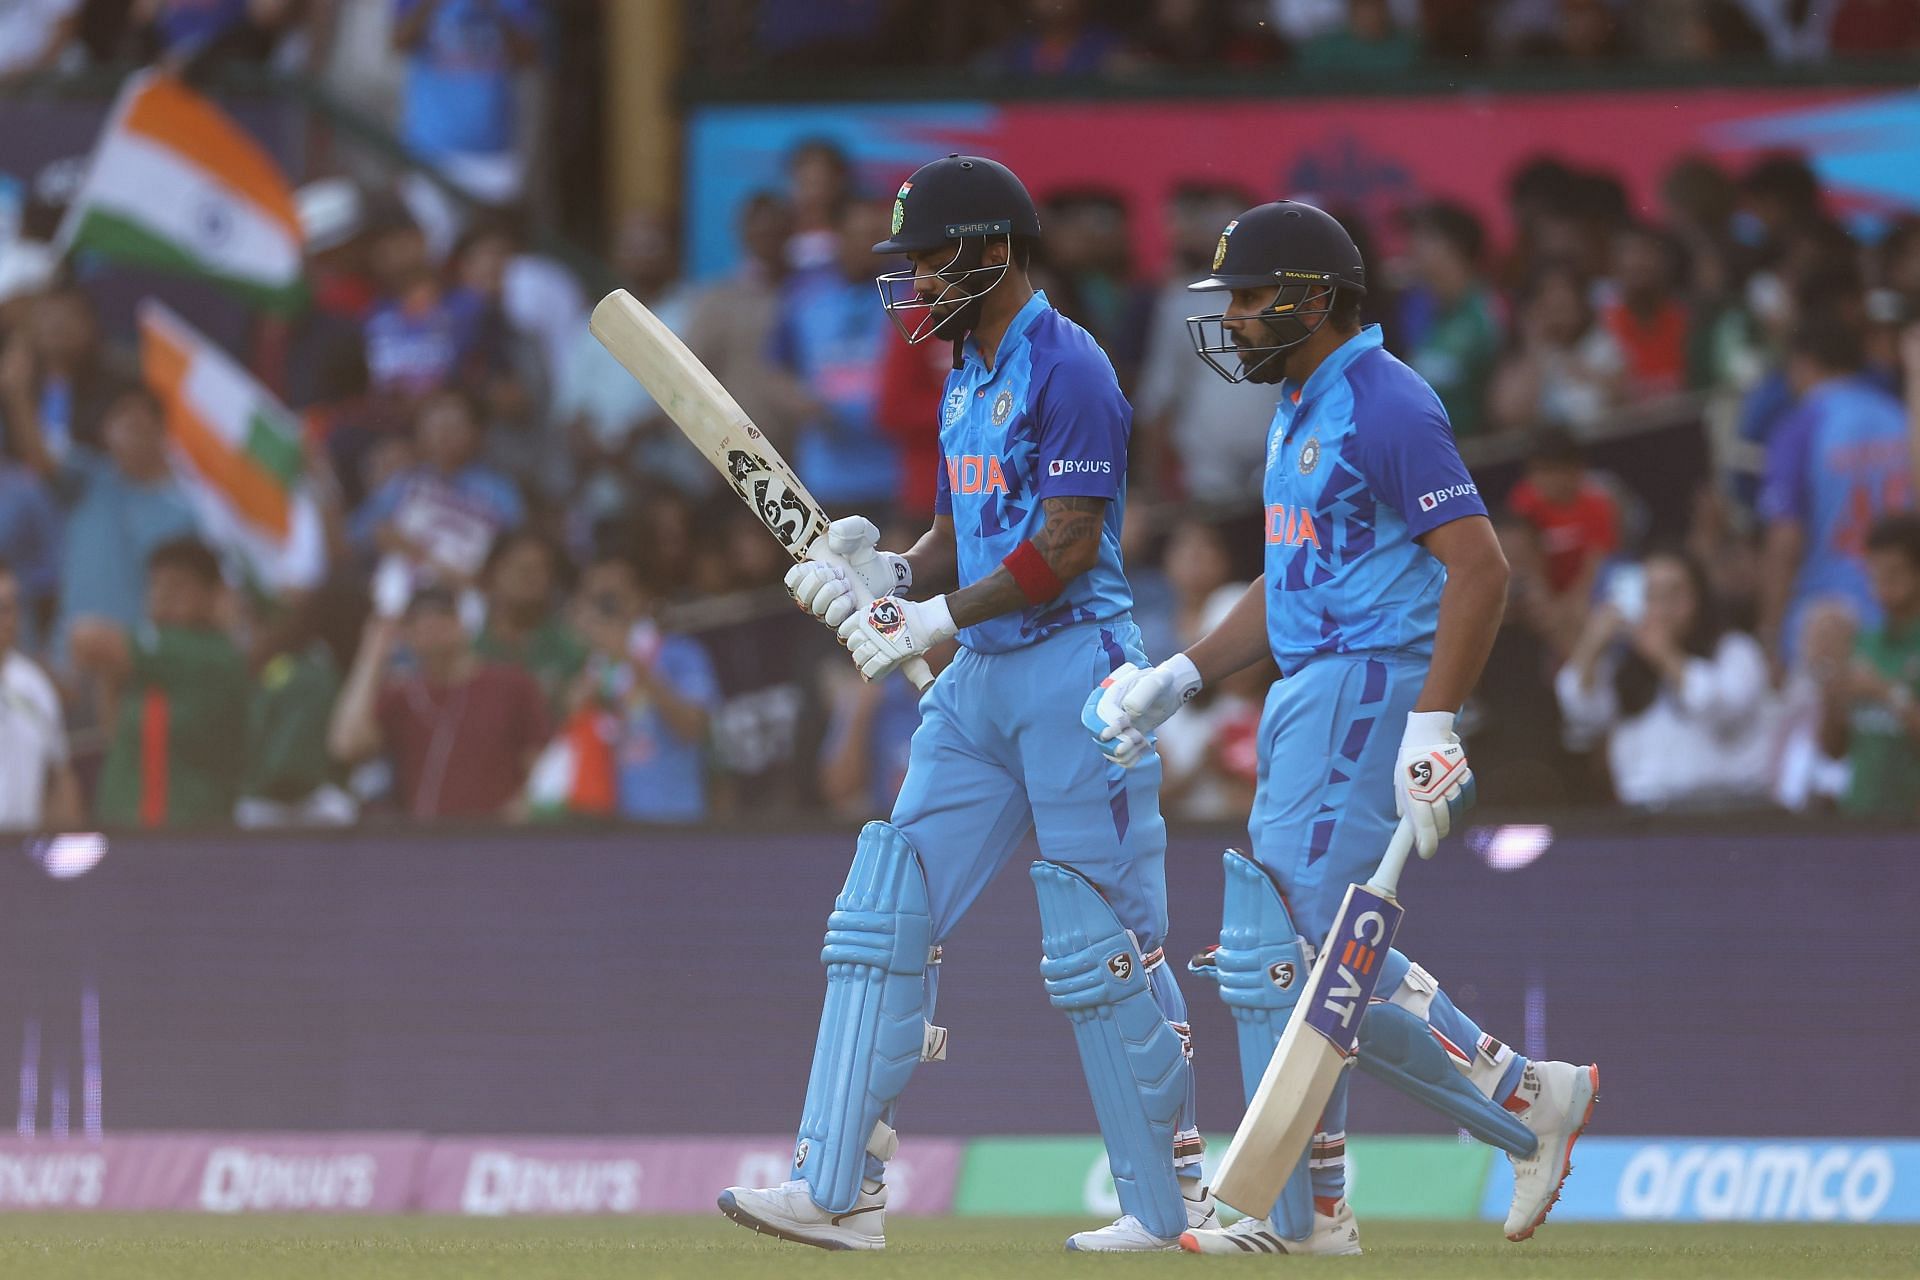 Indian openers flopped once more against England